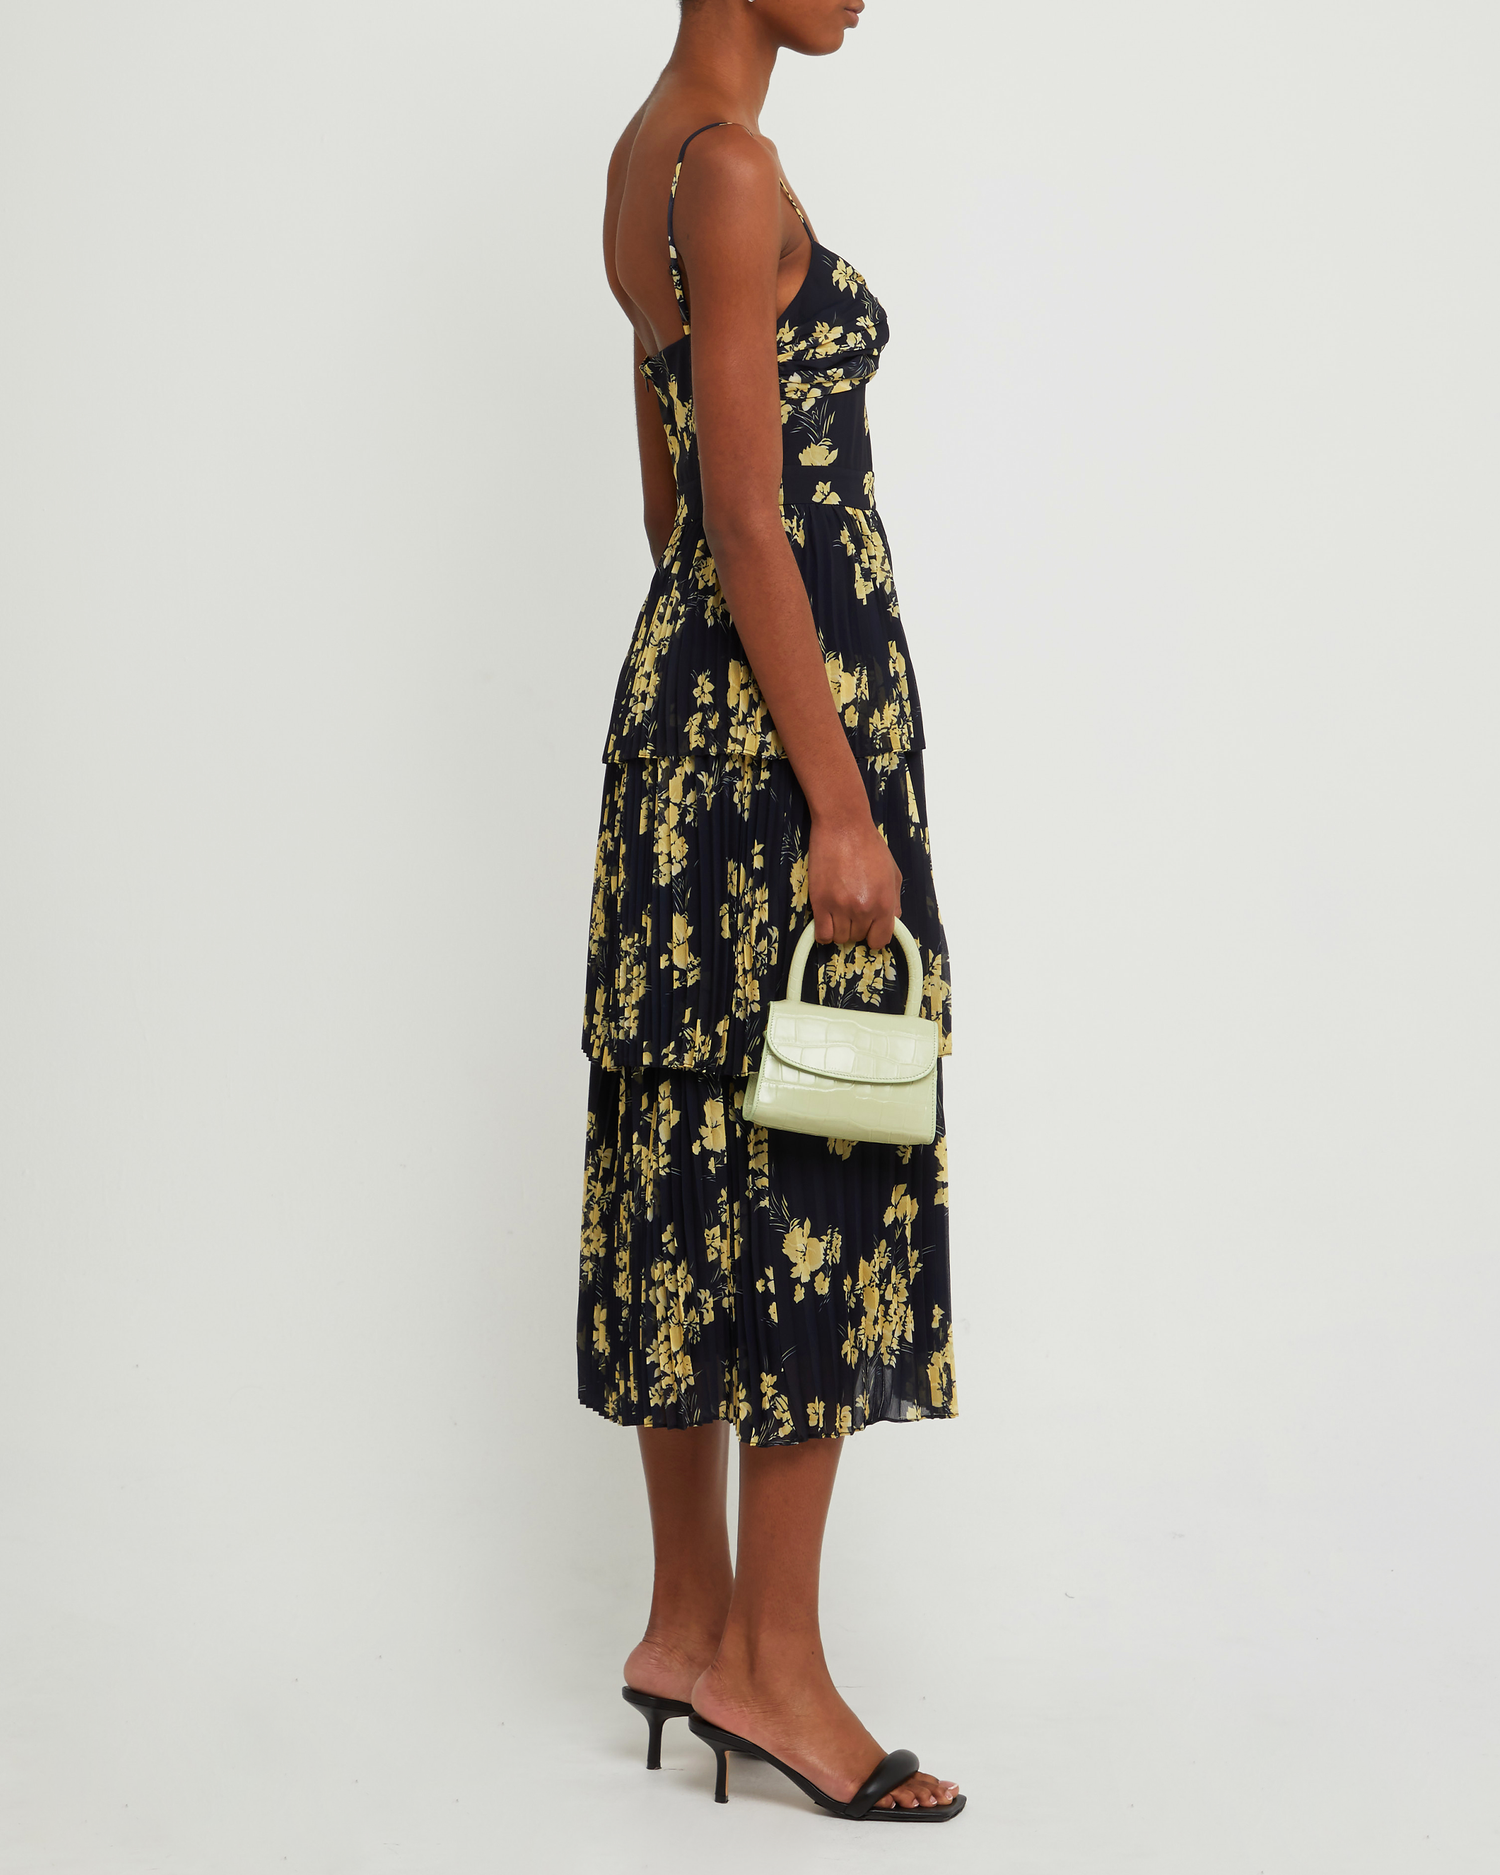 Third image of Paco Dress, a floral maxi dress, tiered, pleated, spaghetti strap, floral, fall